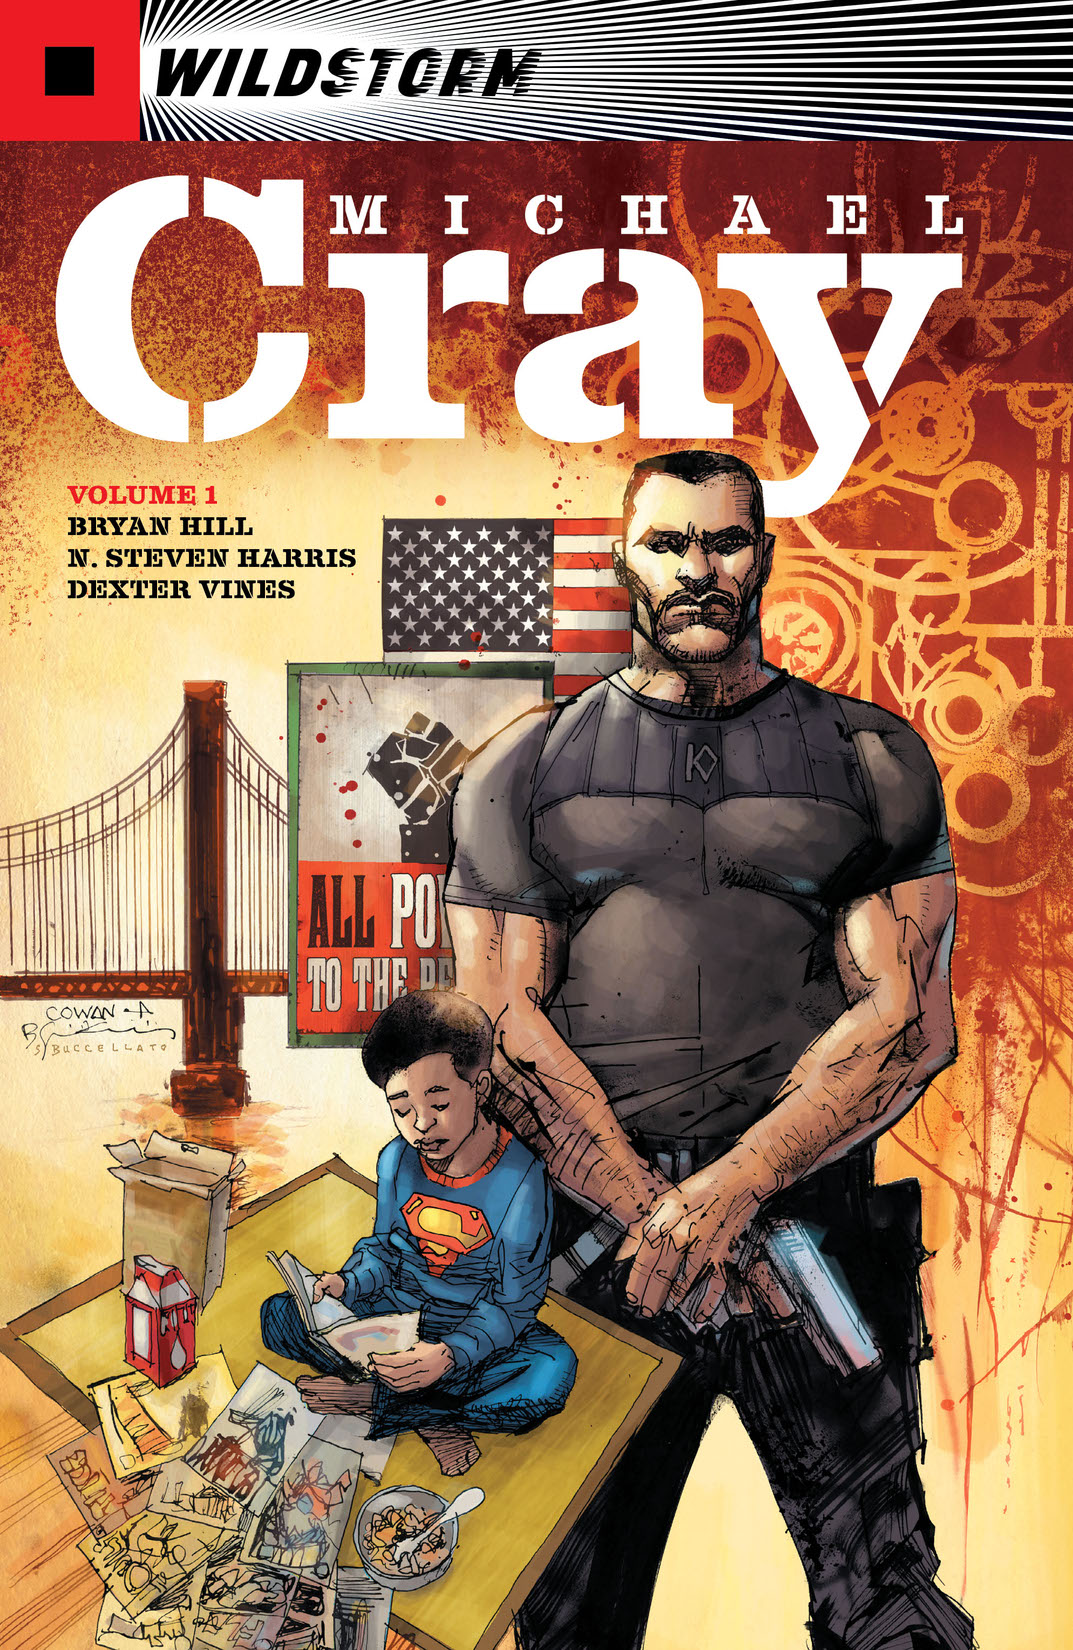 The Wild Storm: Michael Cray Vol. 1 preview images